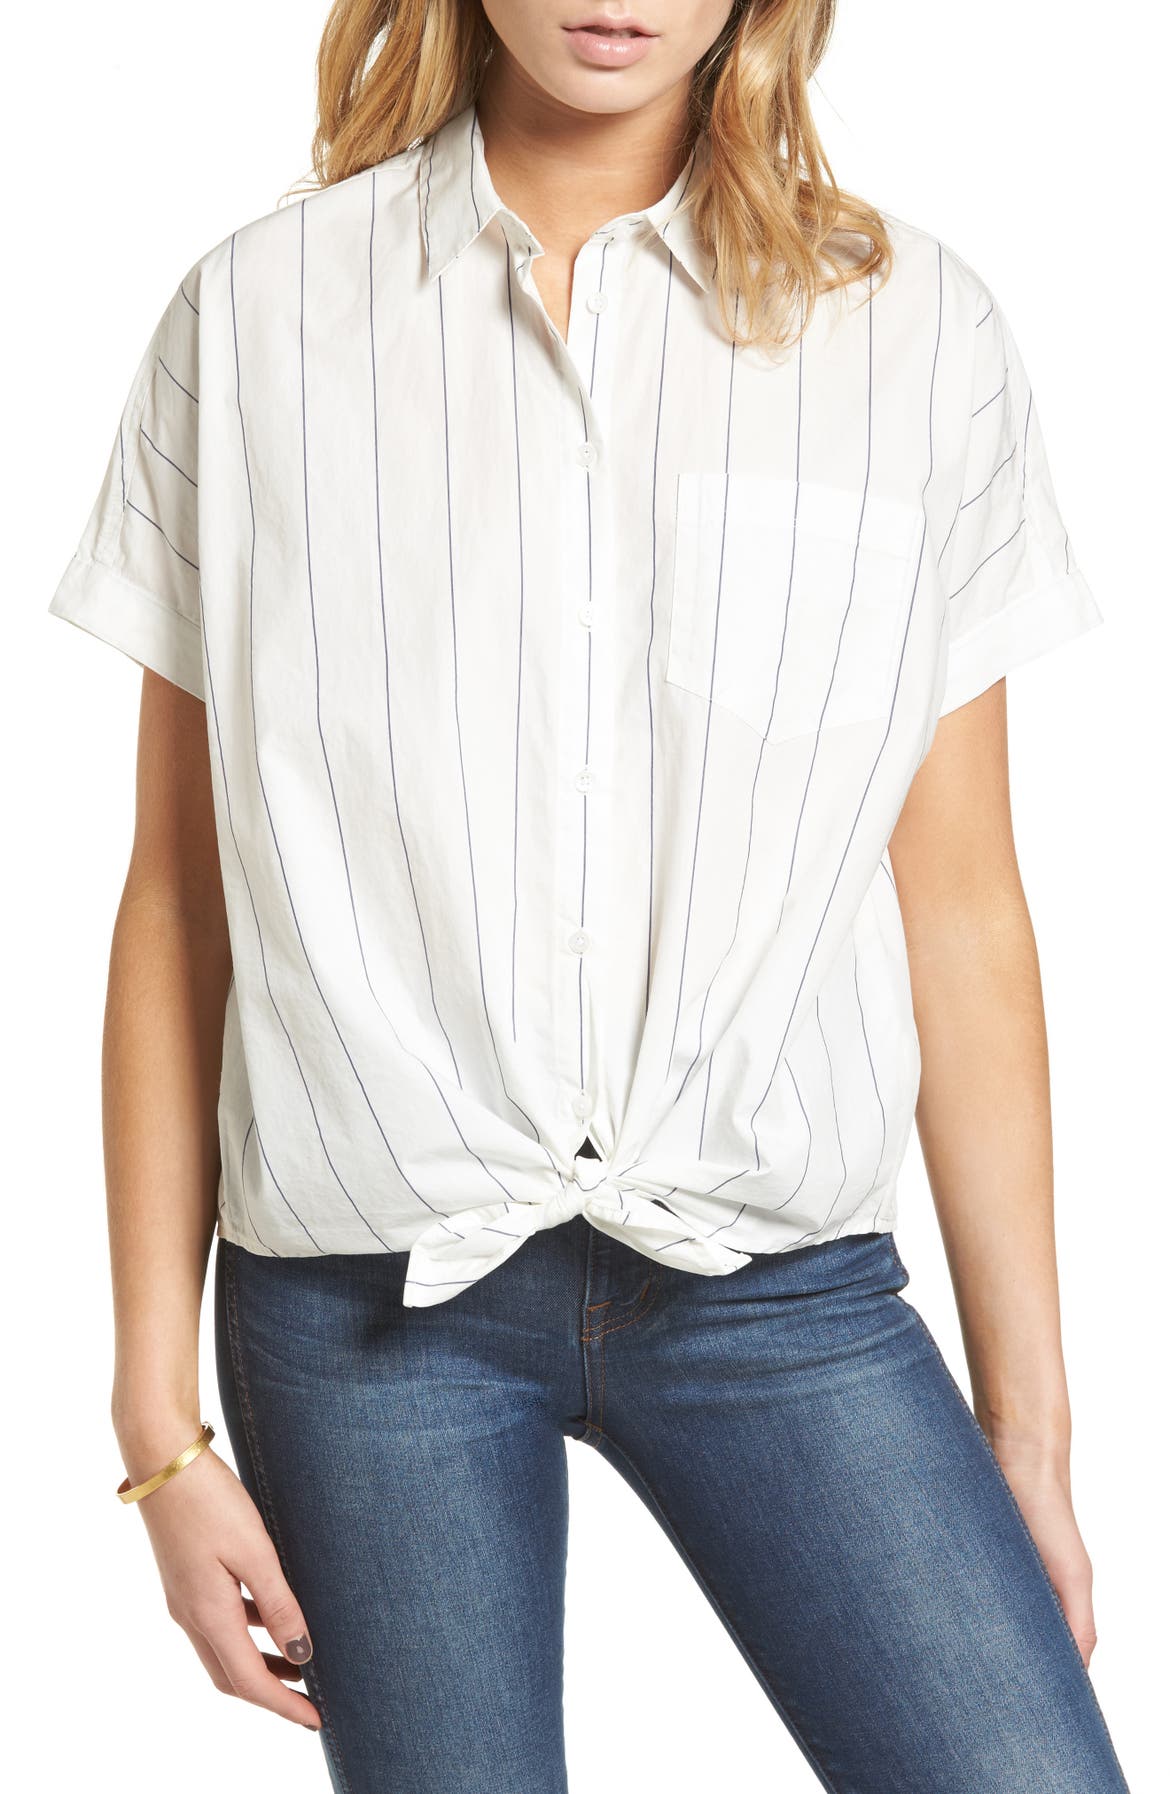 Madewell Tie Front Shirt | Nordstrom